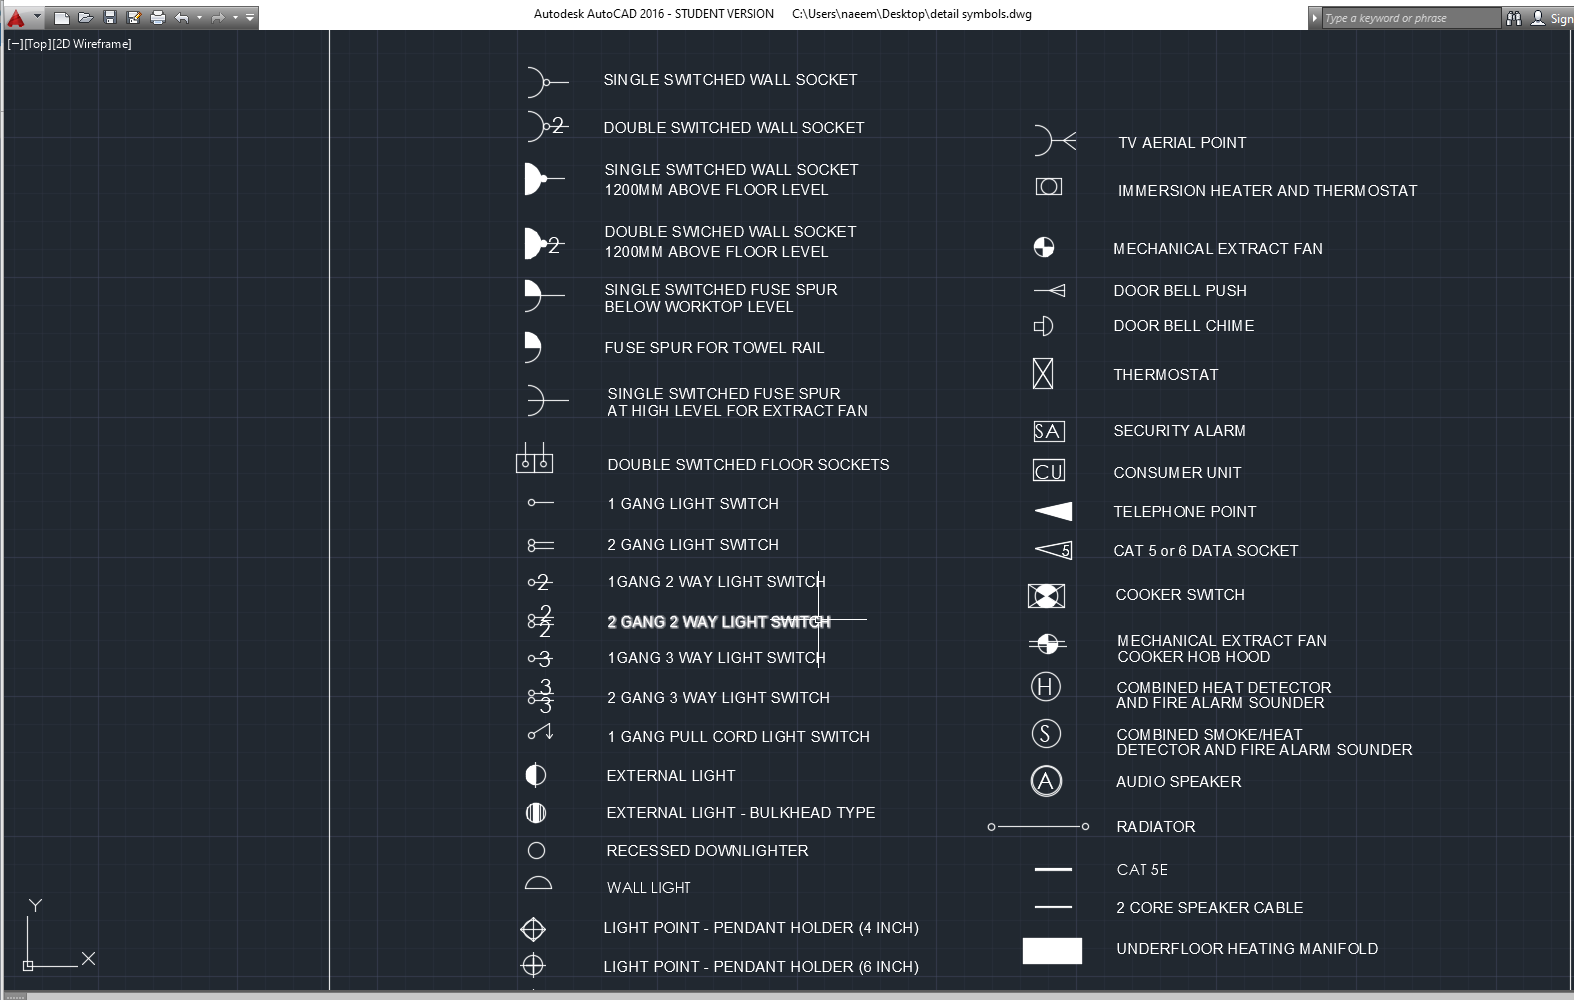 Autocad electrical iec symbol library download - lioinfo